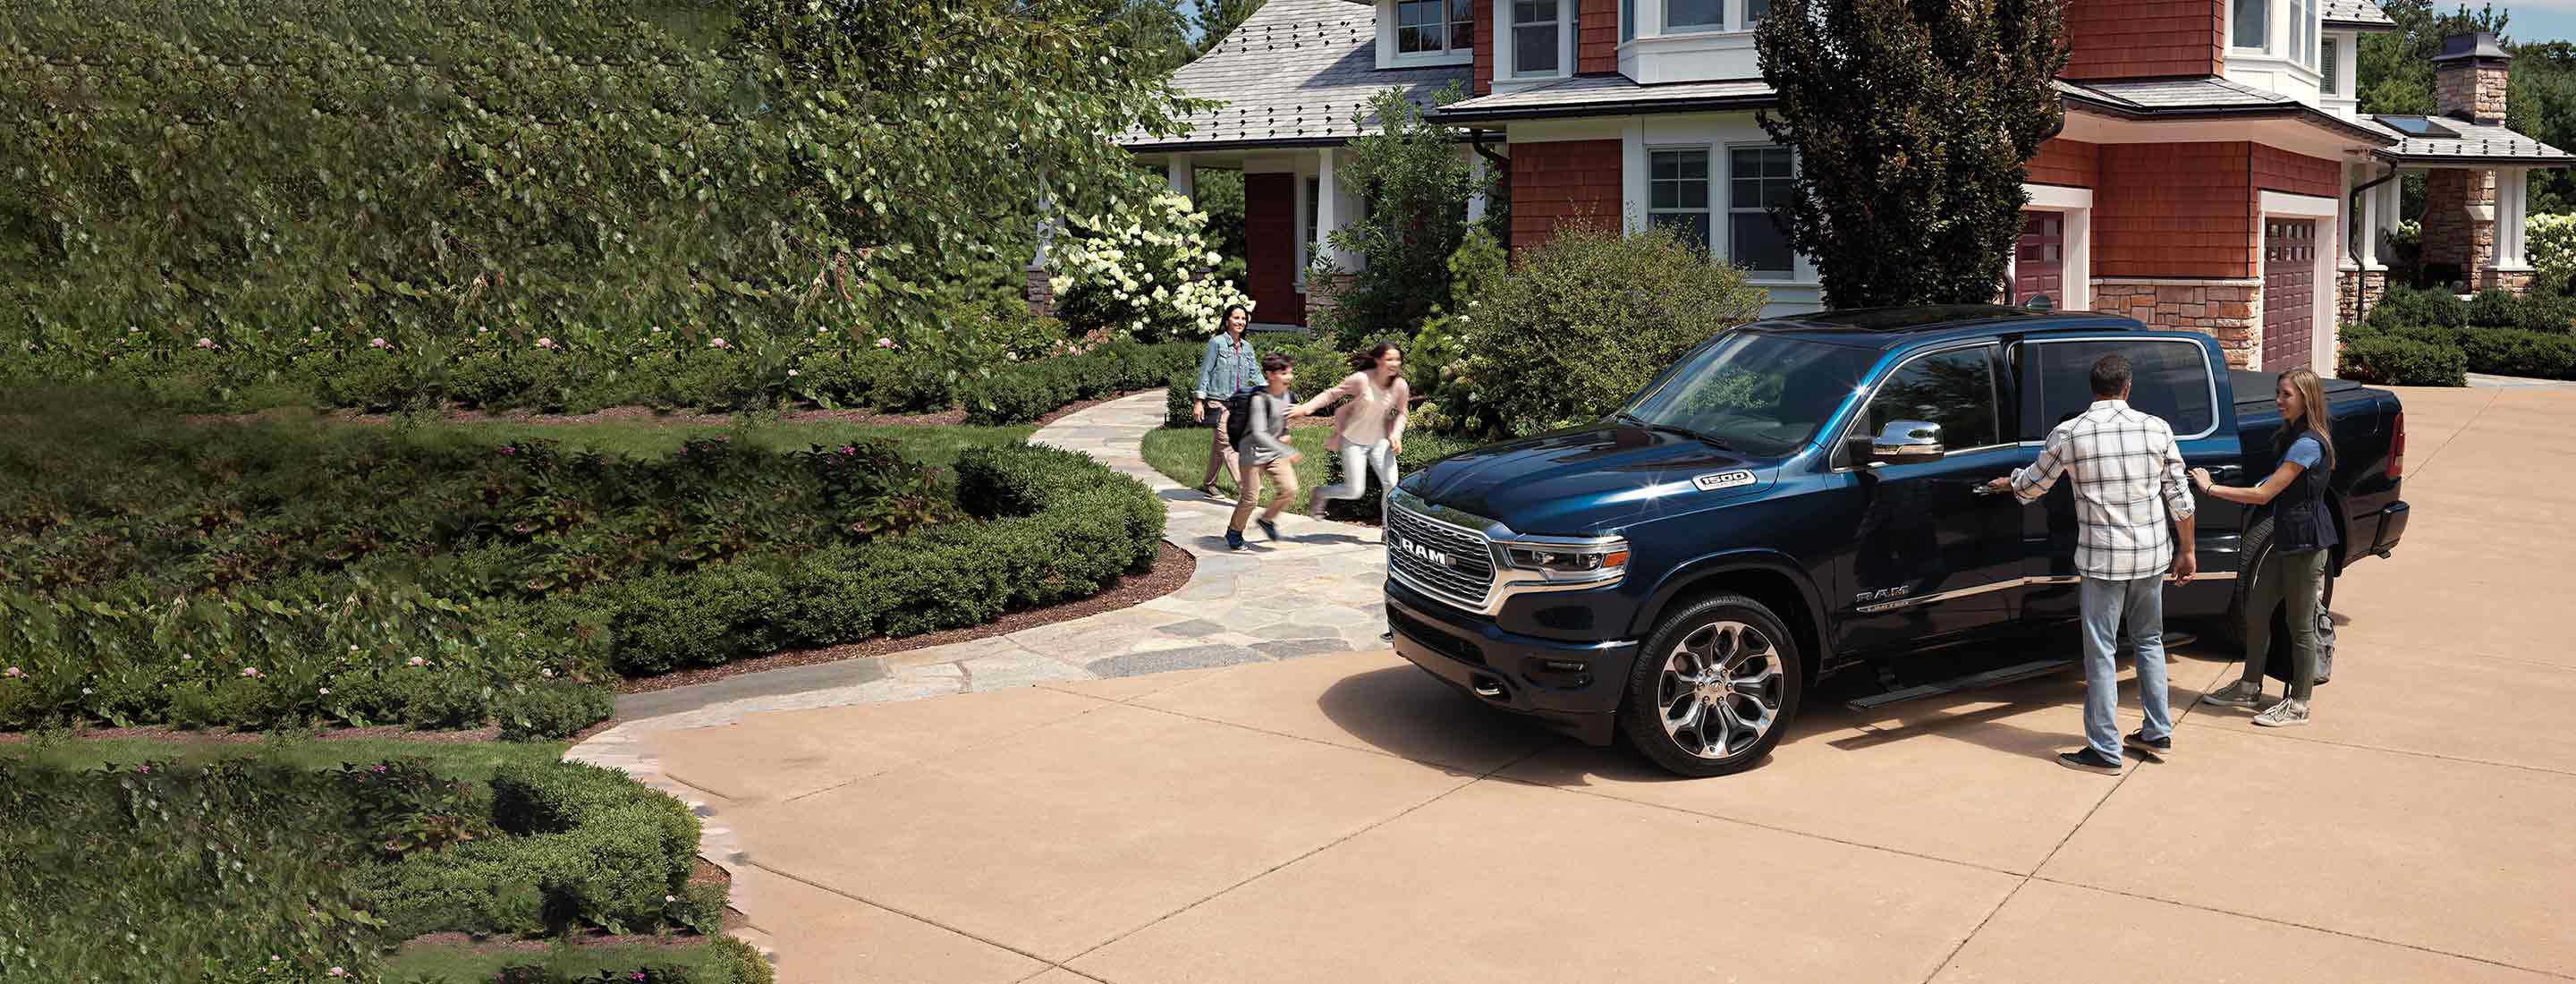 2020 Ram 1500 Limited parked in the driveway of a suburban home.